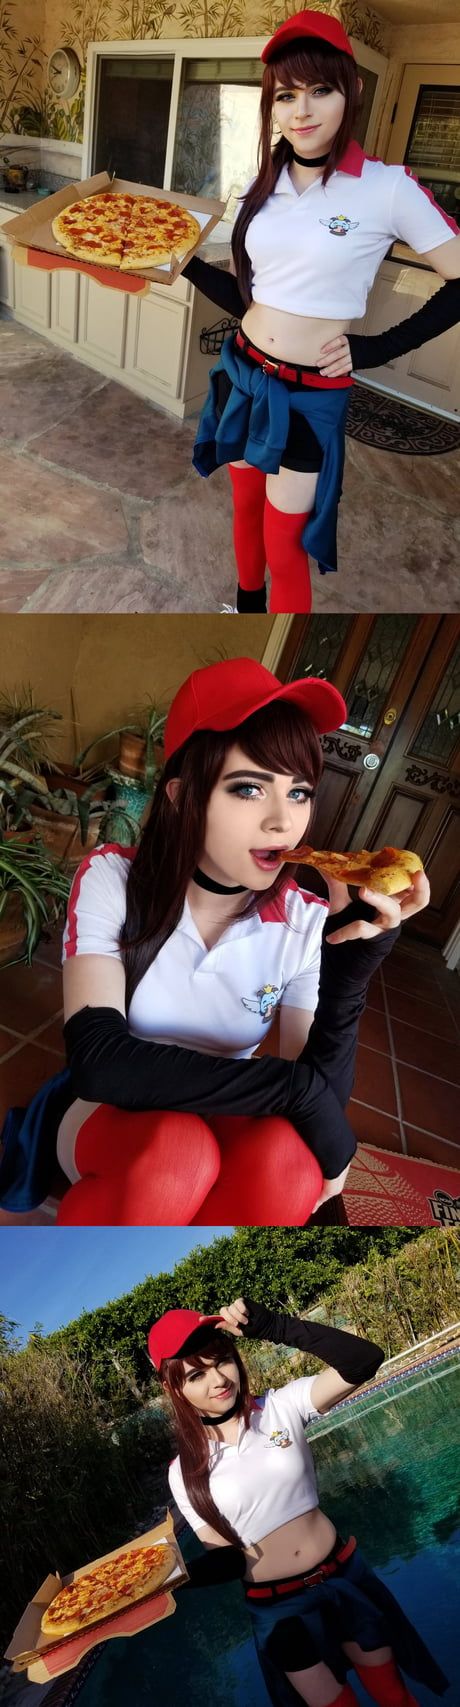 brittany pound recommends sneaky pizza girl cosplay pic